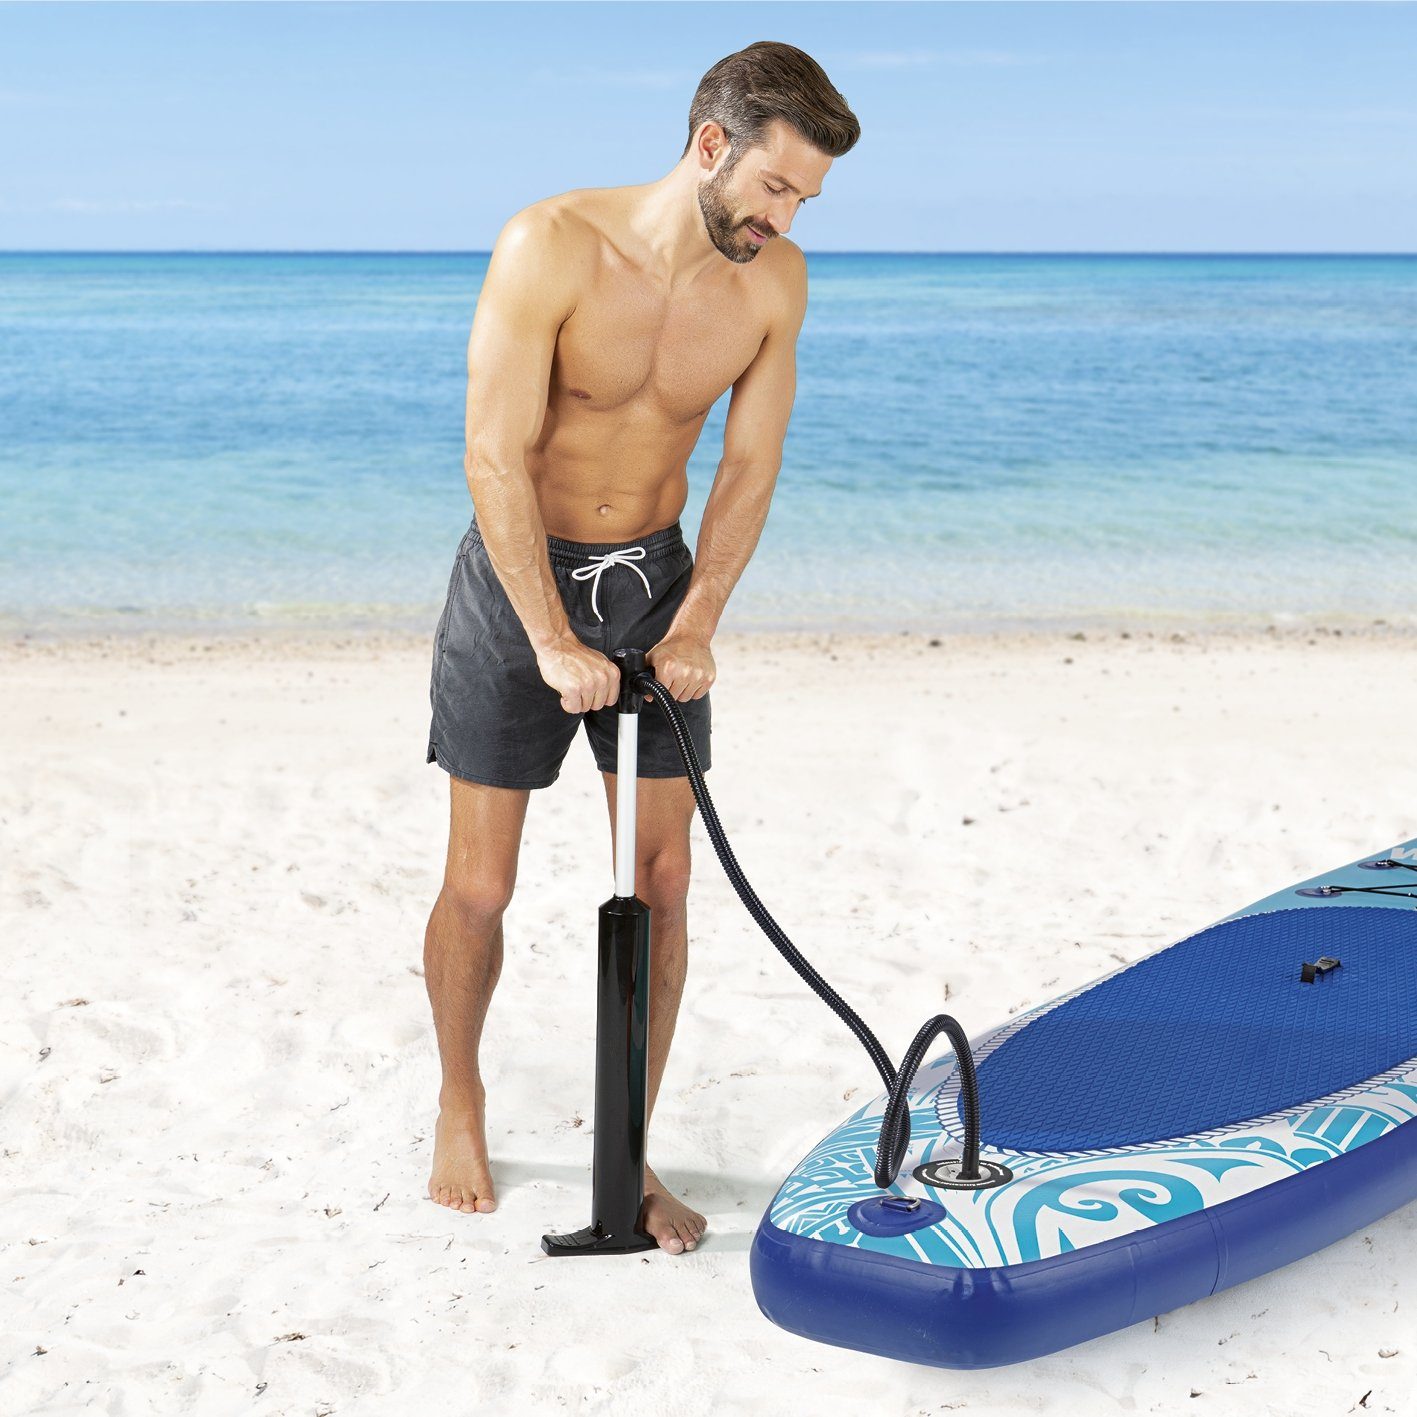 MAXXMEE Inflatable 110kg, Paddle-Board Board SUP Set inkl. SUP-Board, Stand Paddel Paddle cm, 300 Paddling blau/türkis up Board Stand-Up Komplett